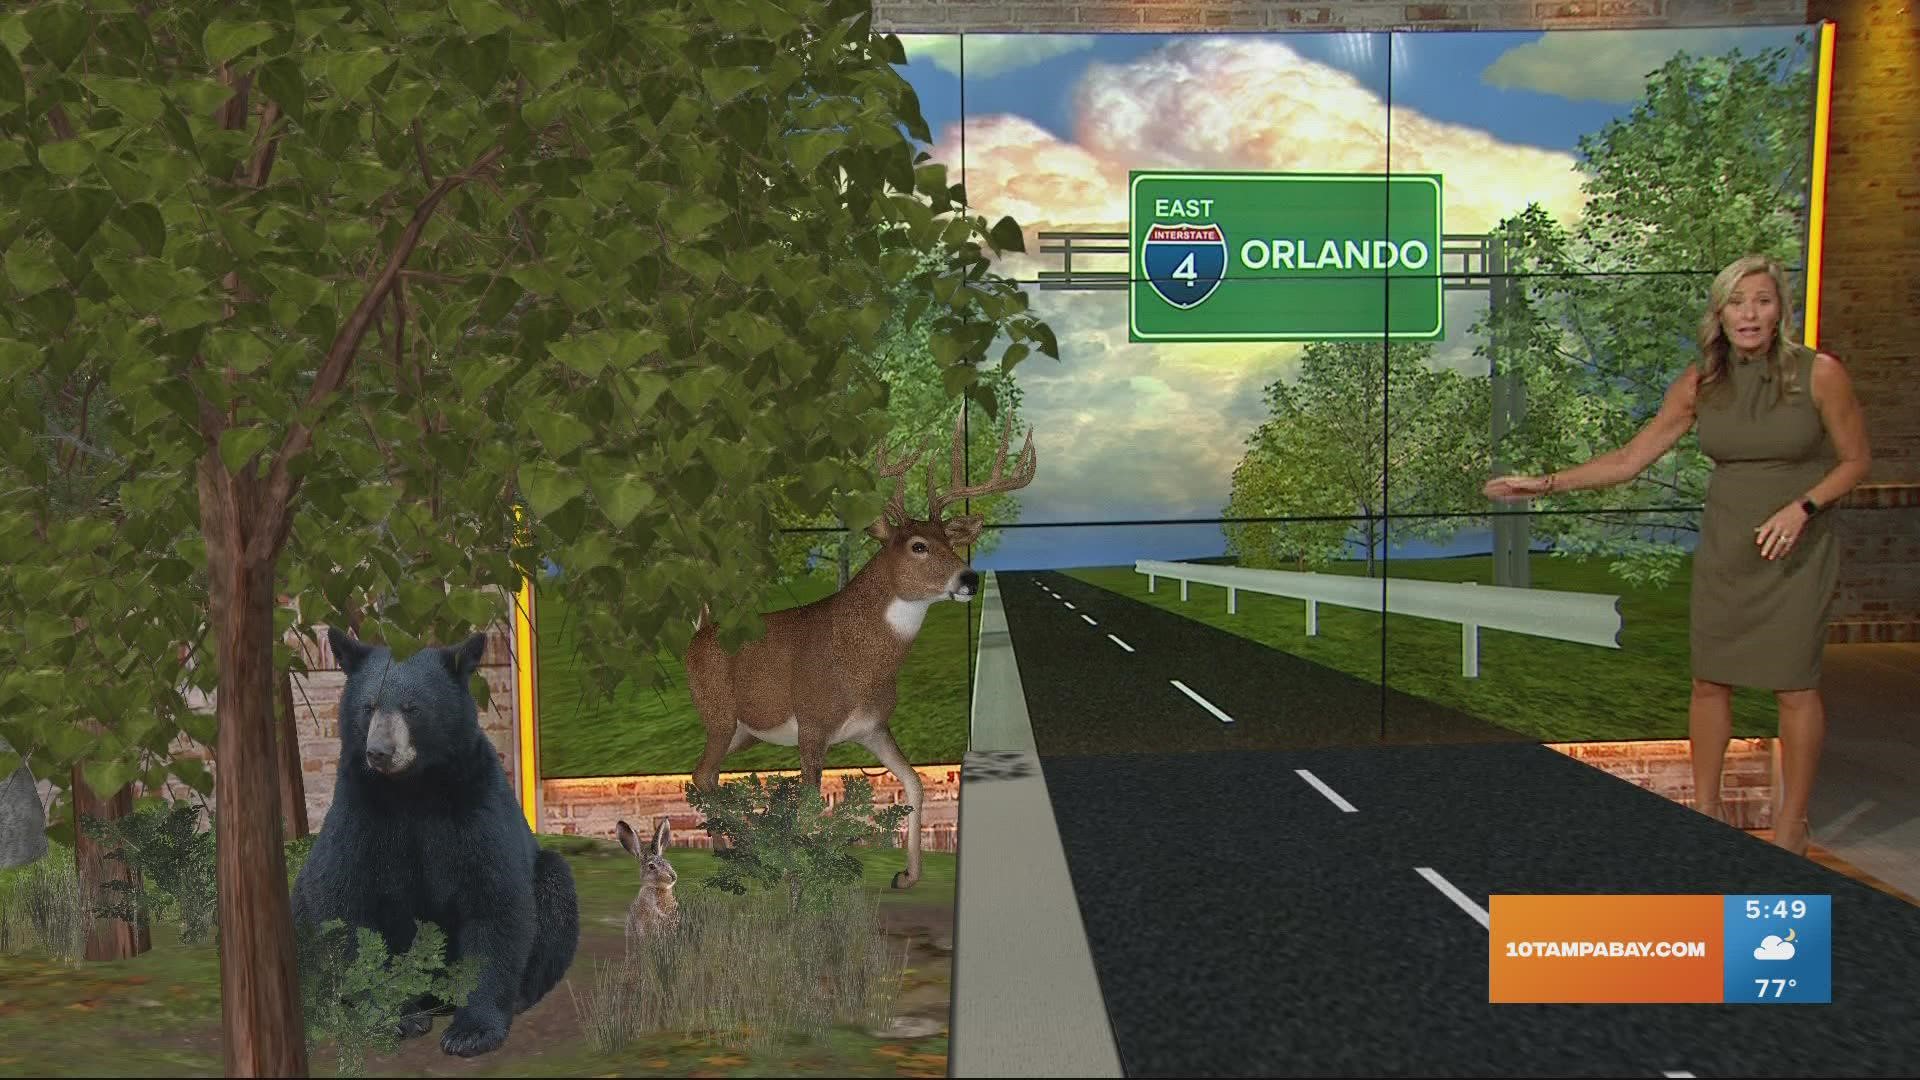 The project, expected to be completed by summer 2023, would help wildlife get from one side of Interstate 4 to the other safely.